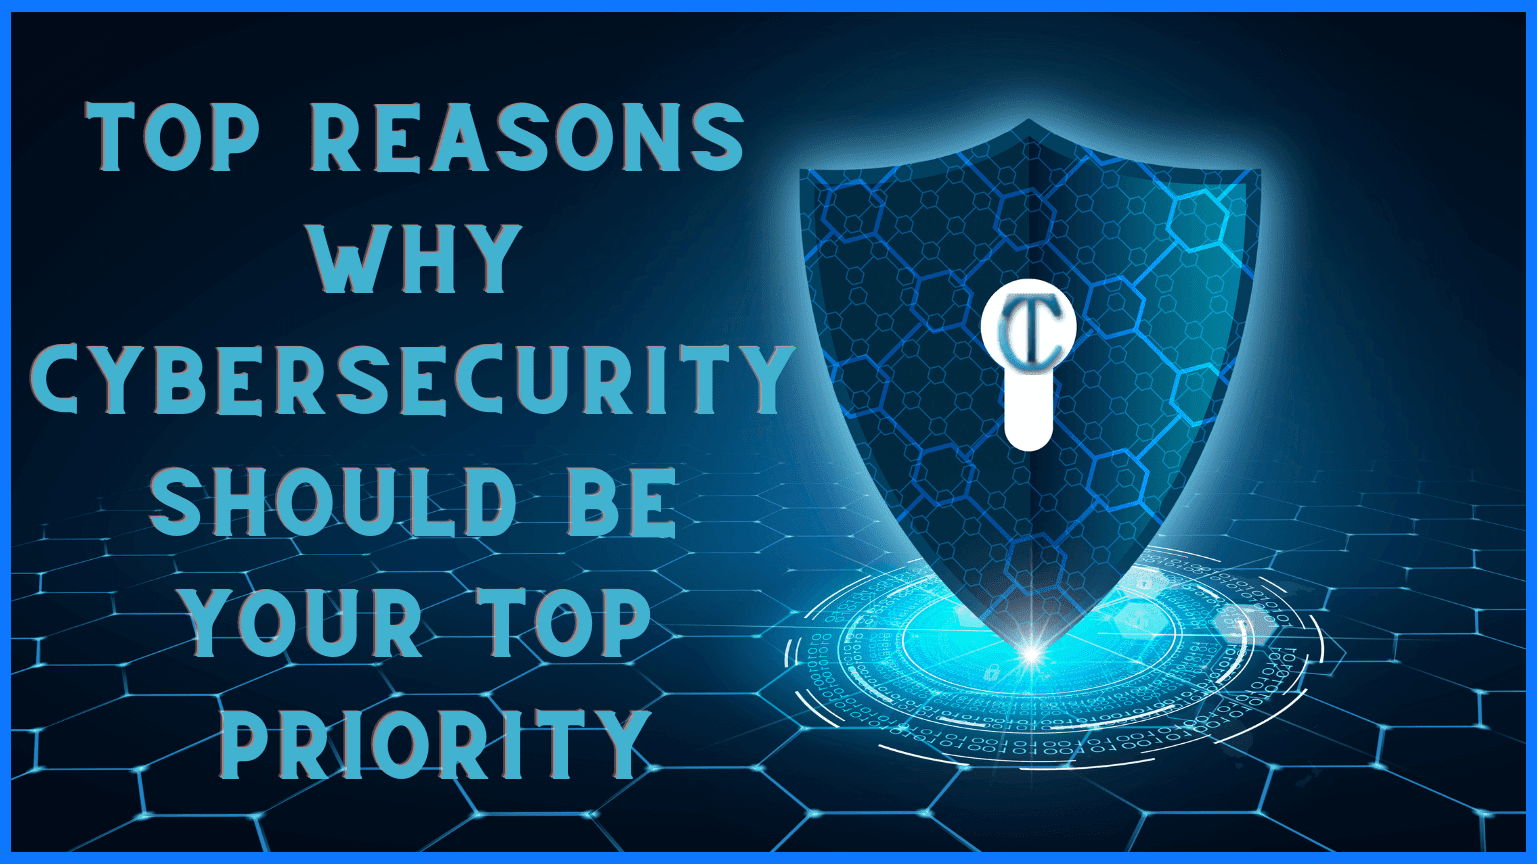 Top Reasons Why Cybersecurity Should Be Your Top Priority